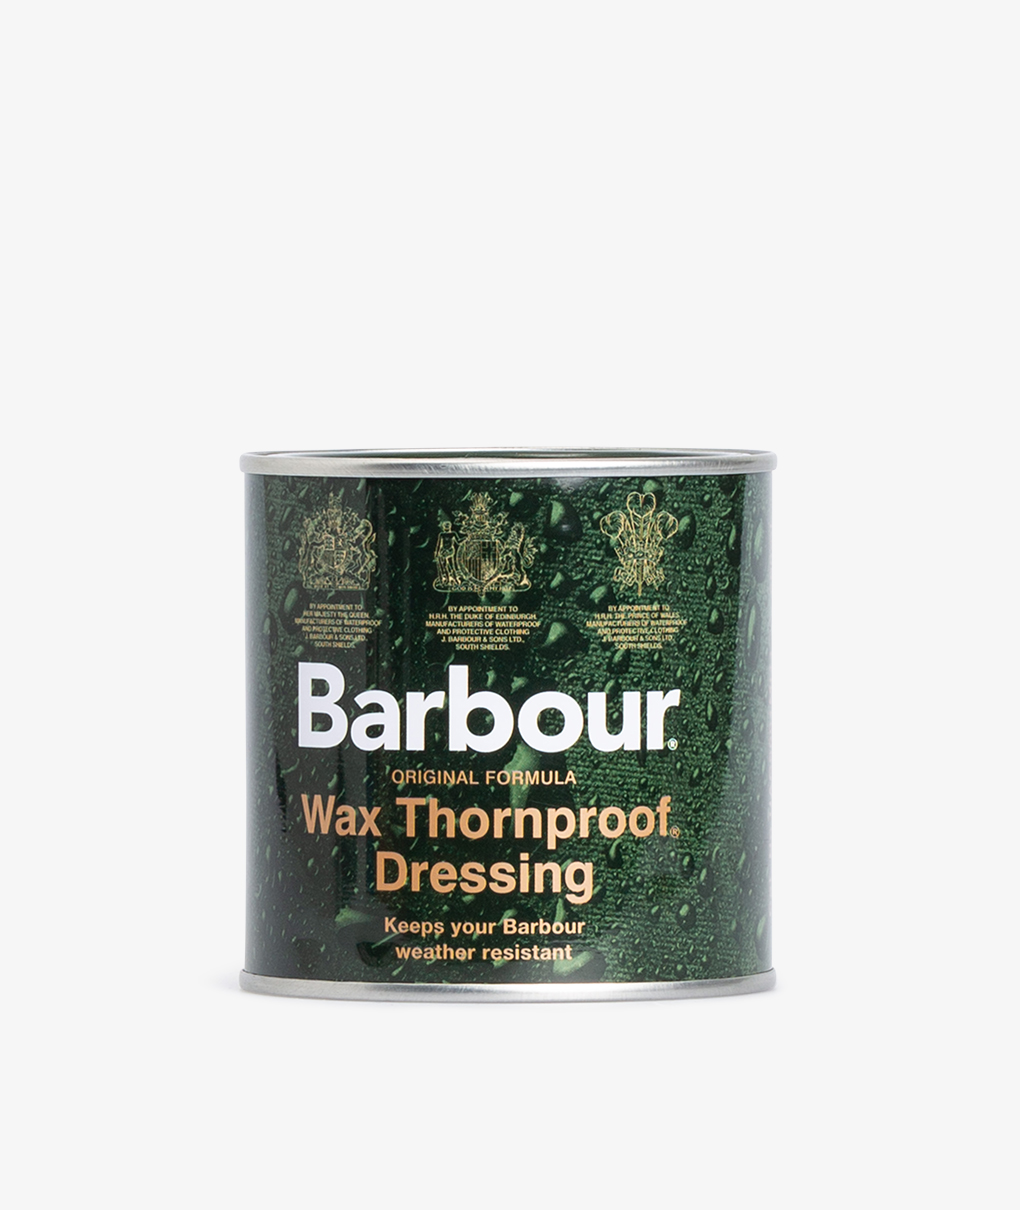 barbour wax thornproof dressing canada 